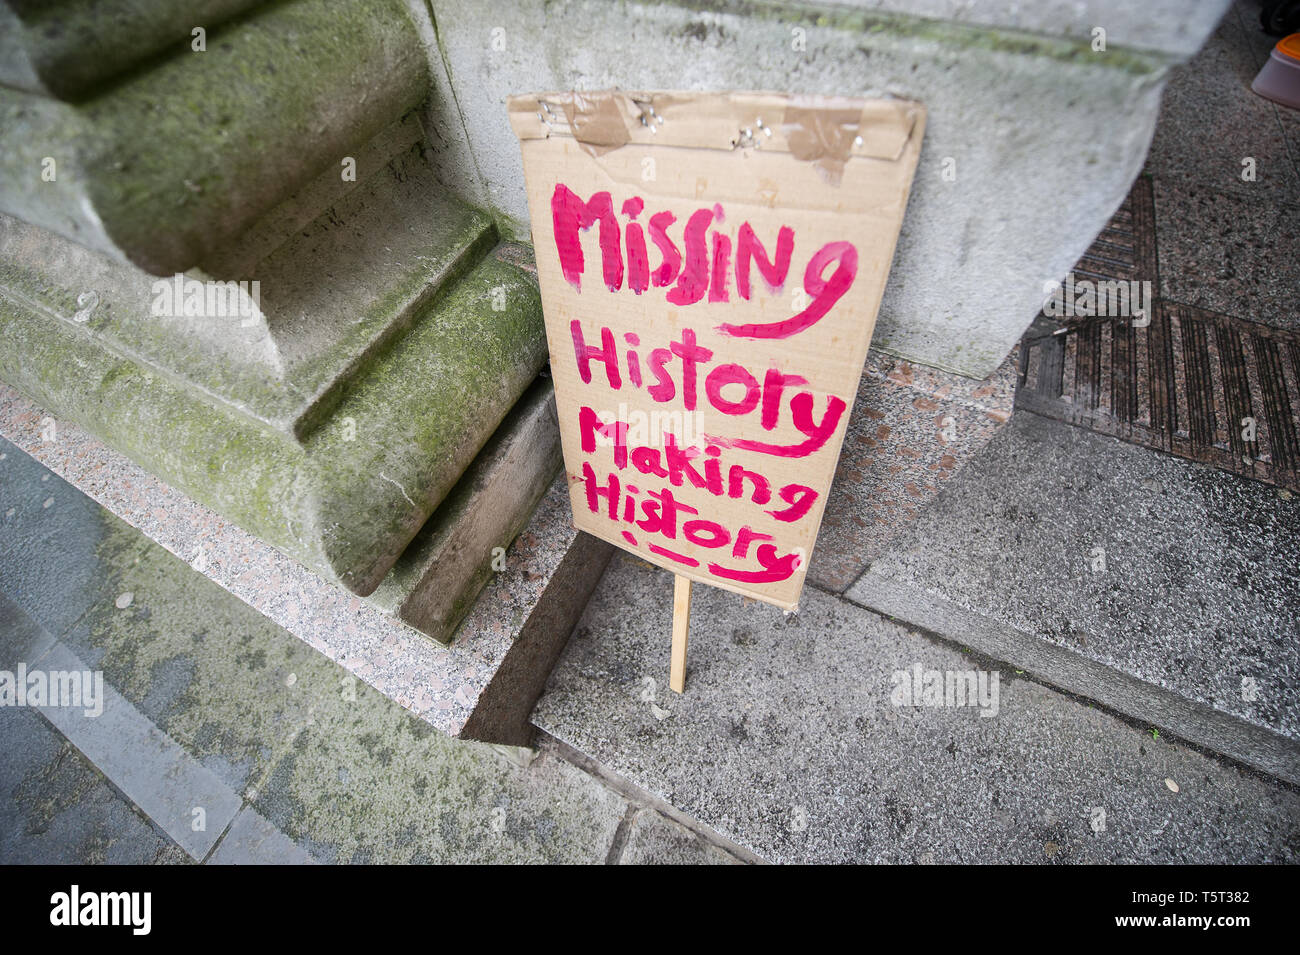 A climate change placard seen during the weekly Extinction Rebellion protest outside Manchester Central Library.  Extinction Rebellion is a socio-political movement which uses nonviolent resistance to protest against climate breakdown, biodiversity loss, and the risk of human extinction and ecological collapse. Stock Photo